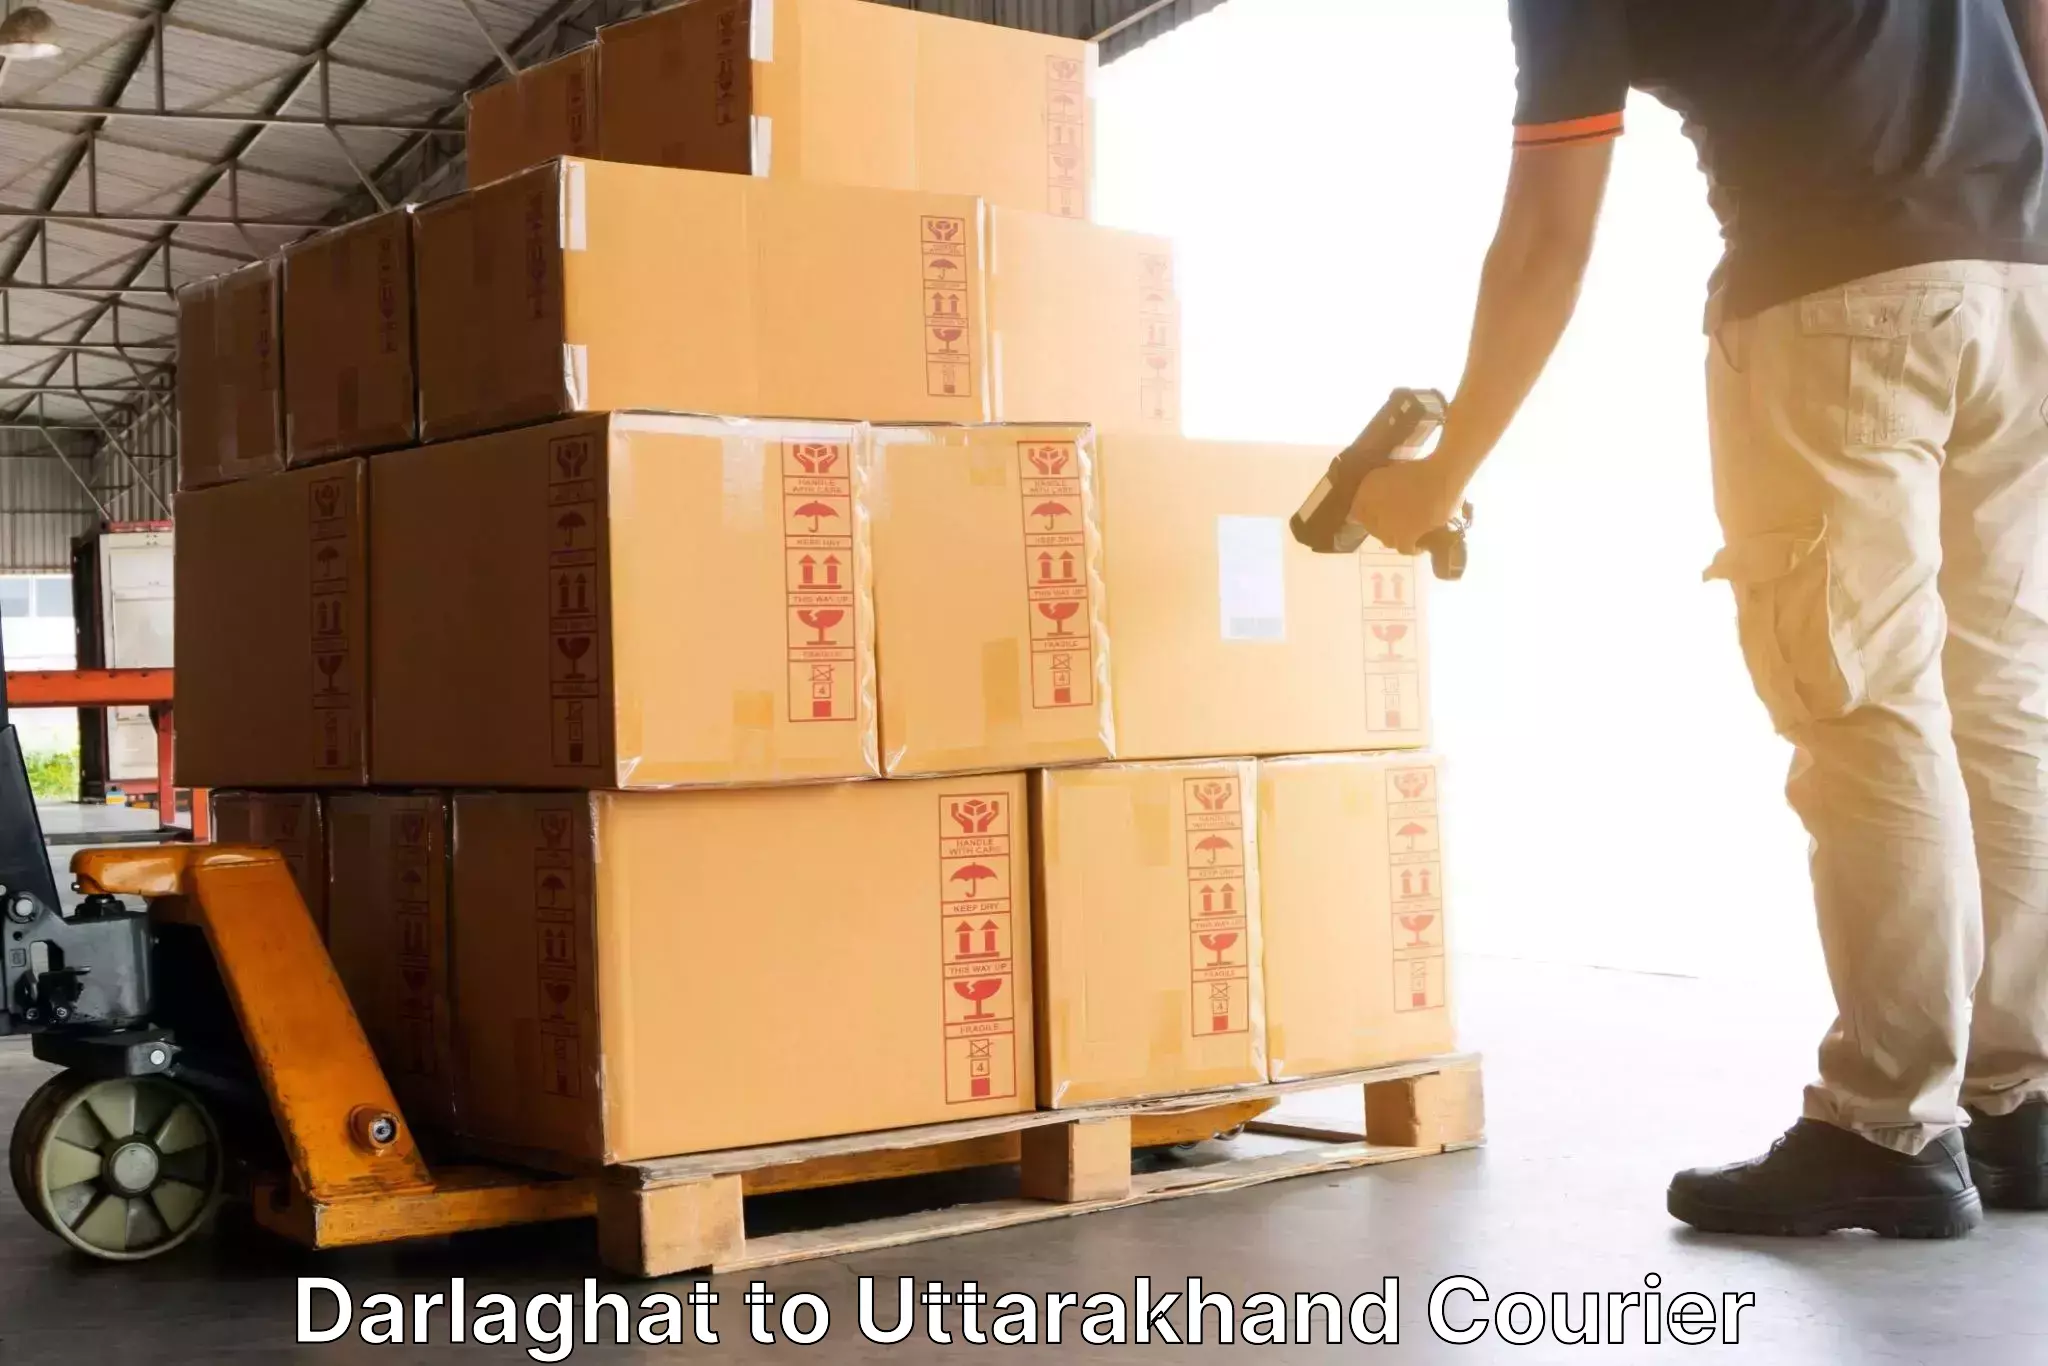 Efficient freight service Darlaghat to Paithani